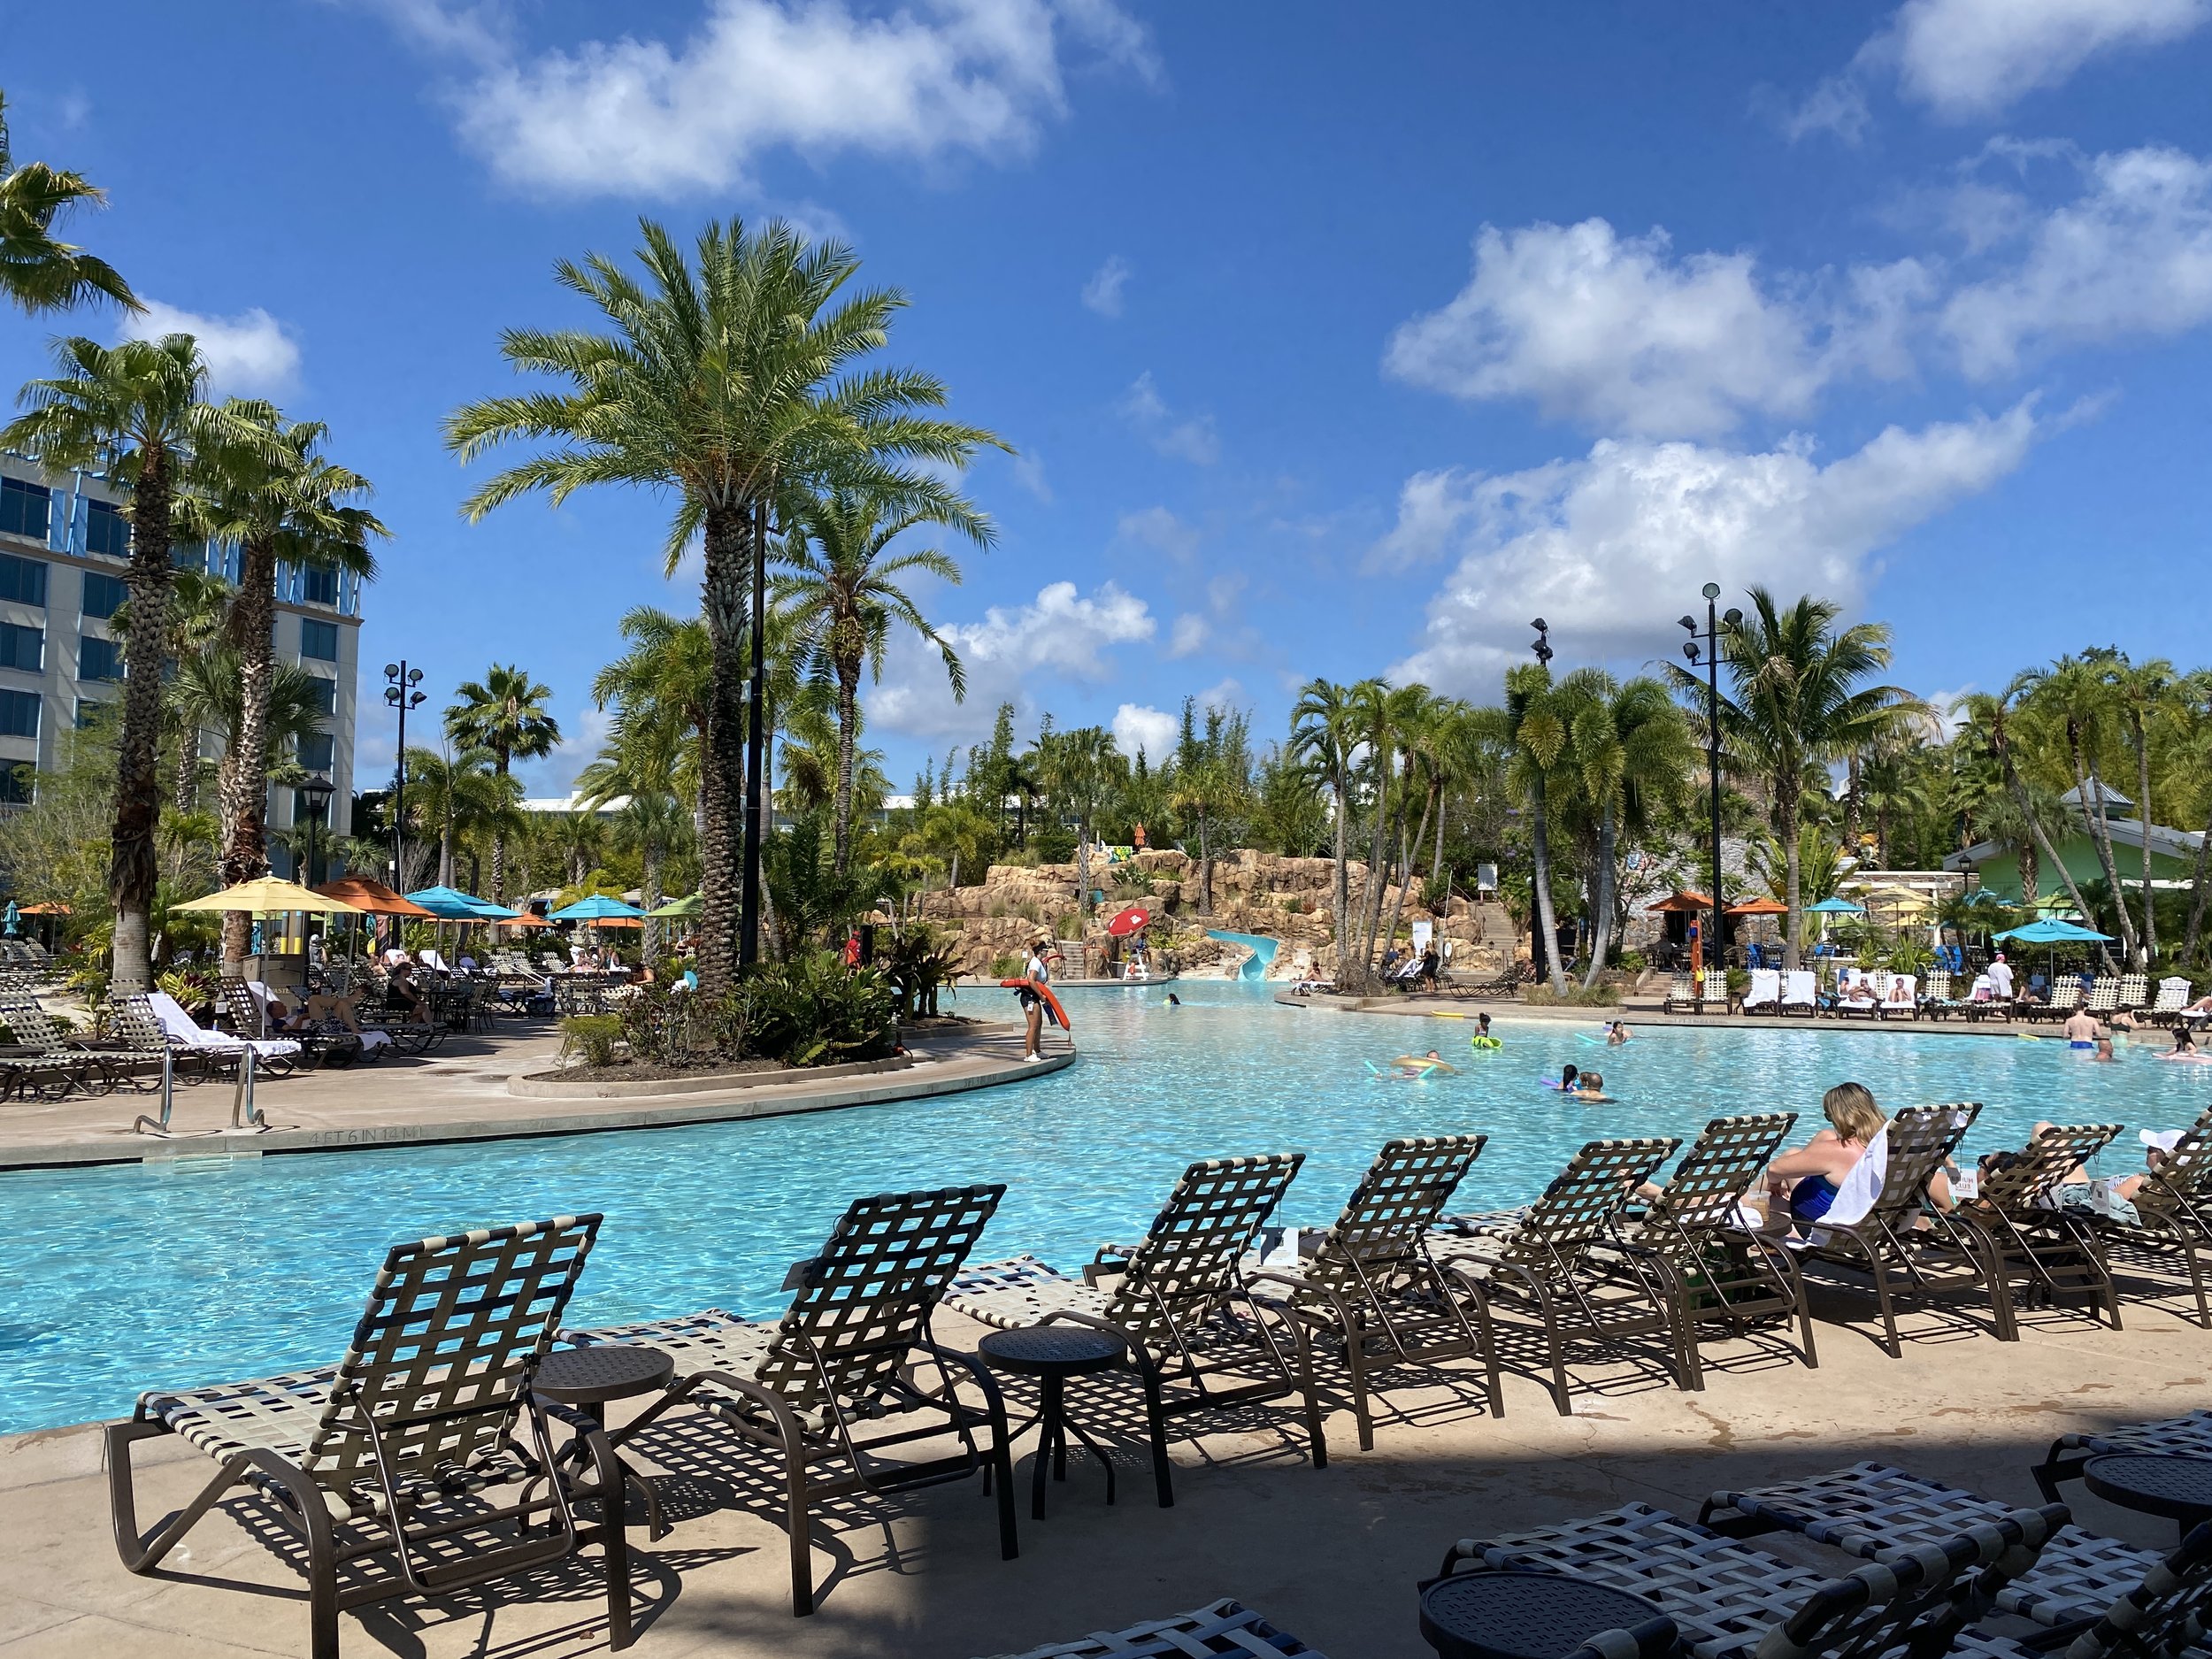  Sapphire Falls Resort staff will offer a variety of activities including hula-hoop contests, poolside moves, splash contests, and more. 